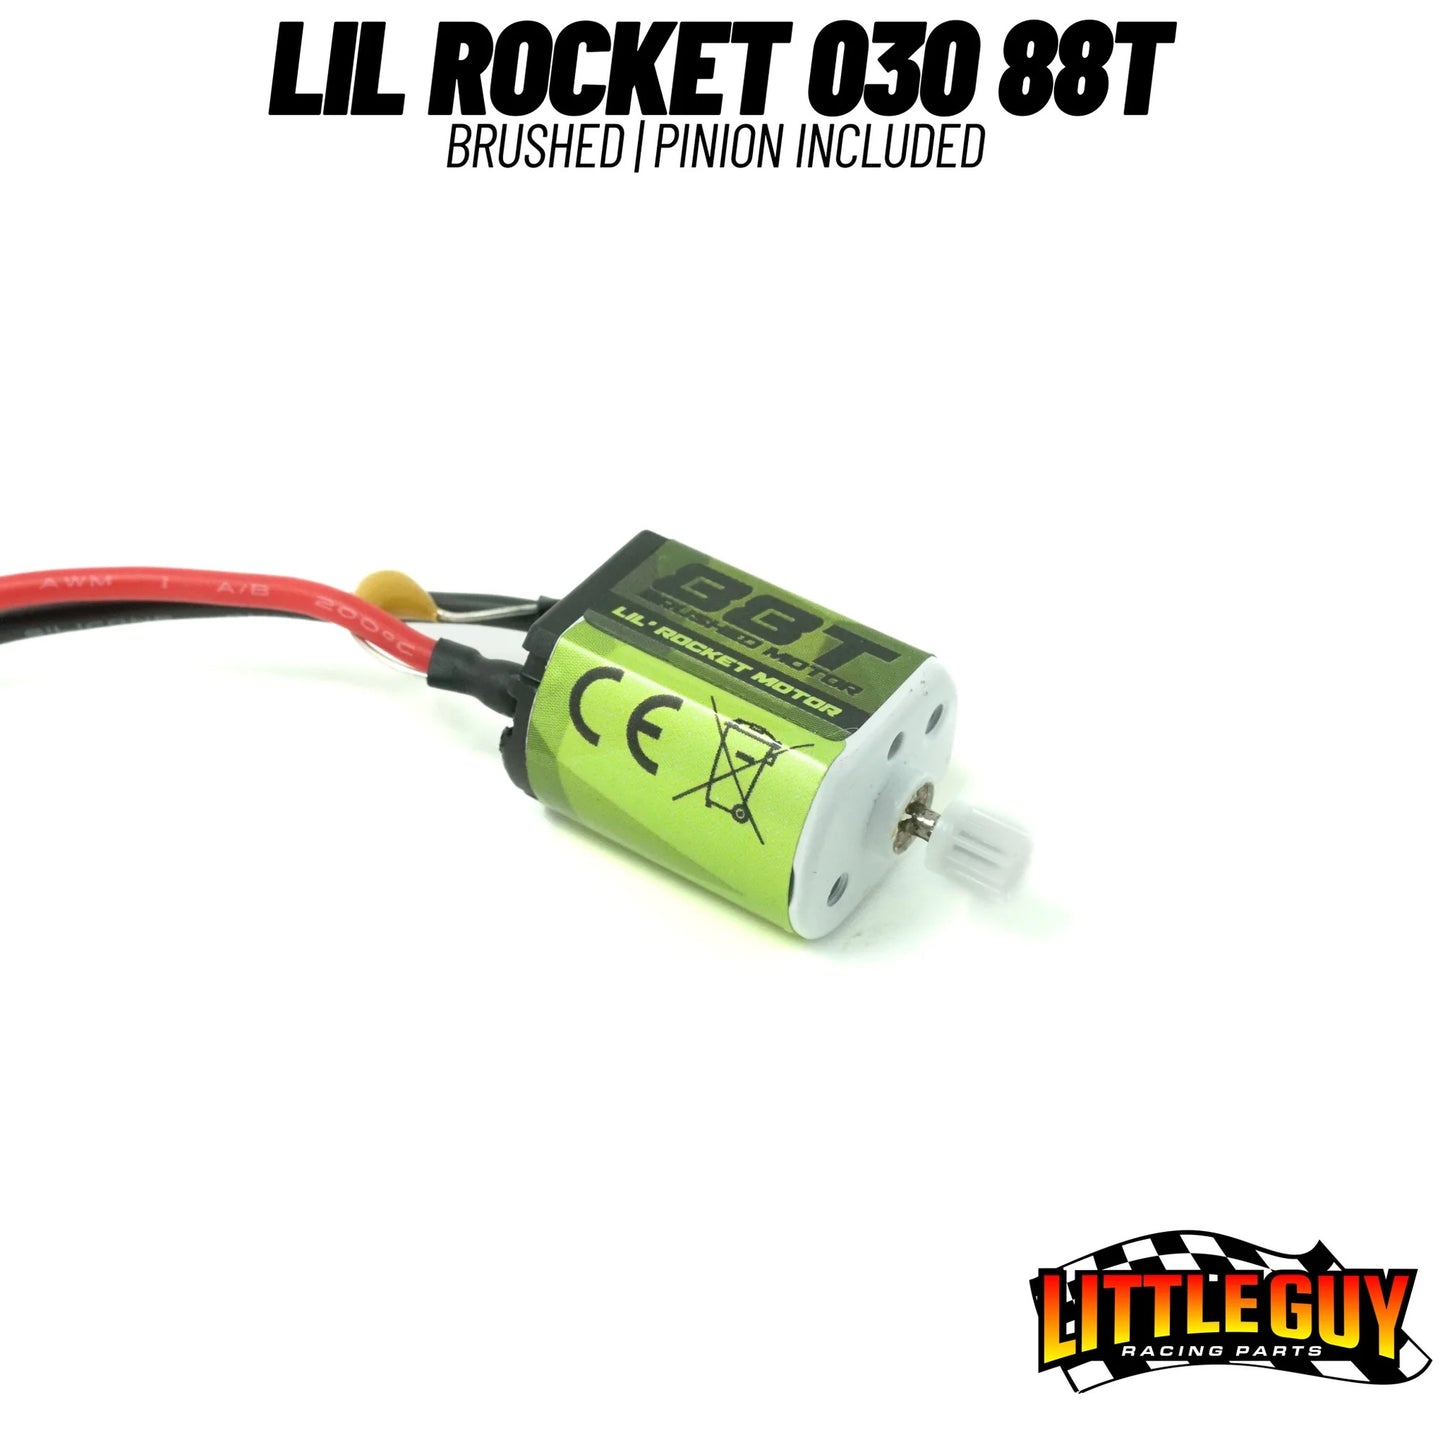 Lil' Rocket 030 88T - Factory style replacement / fast top end speed